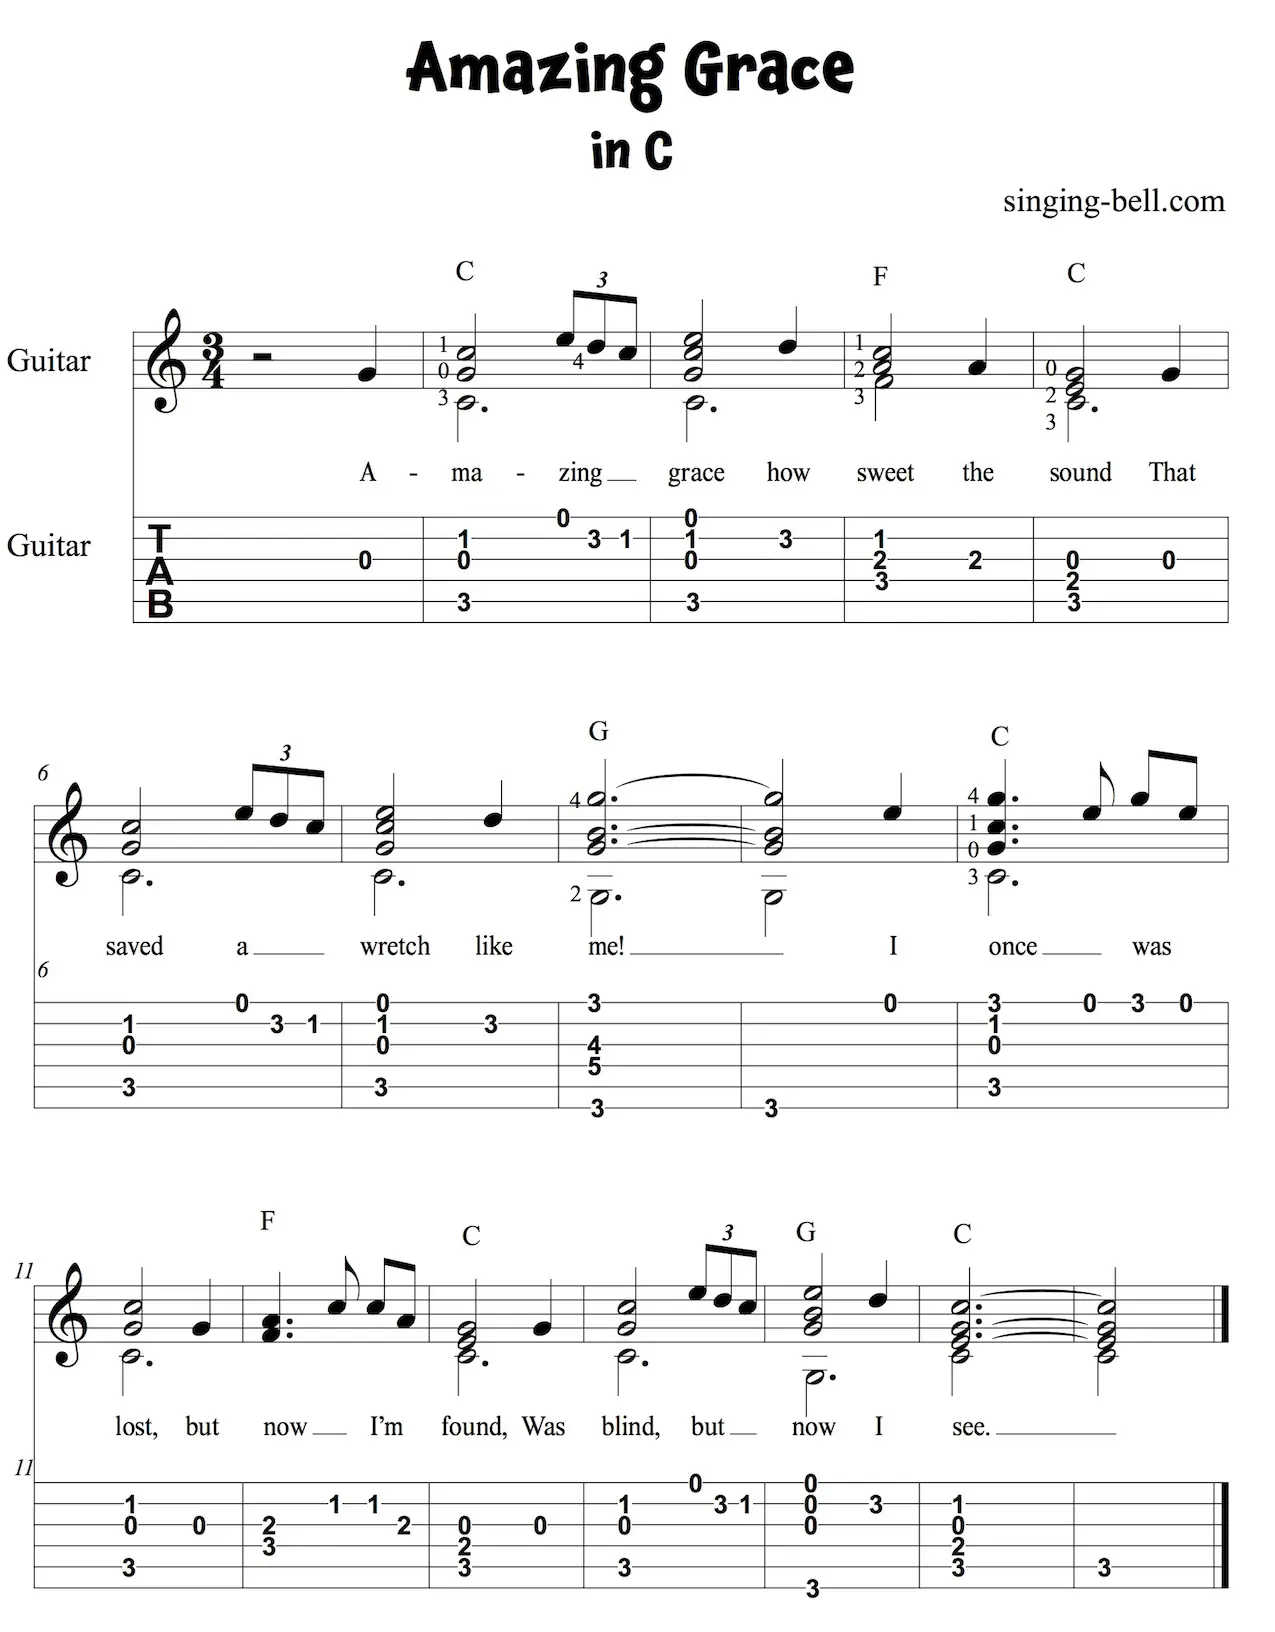 Amazing Grace Easy Guitar Sheet Music with Notes and Tablature in C.